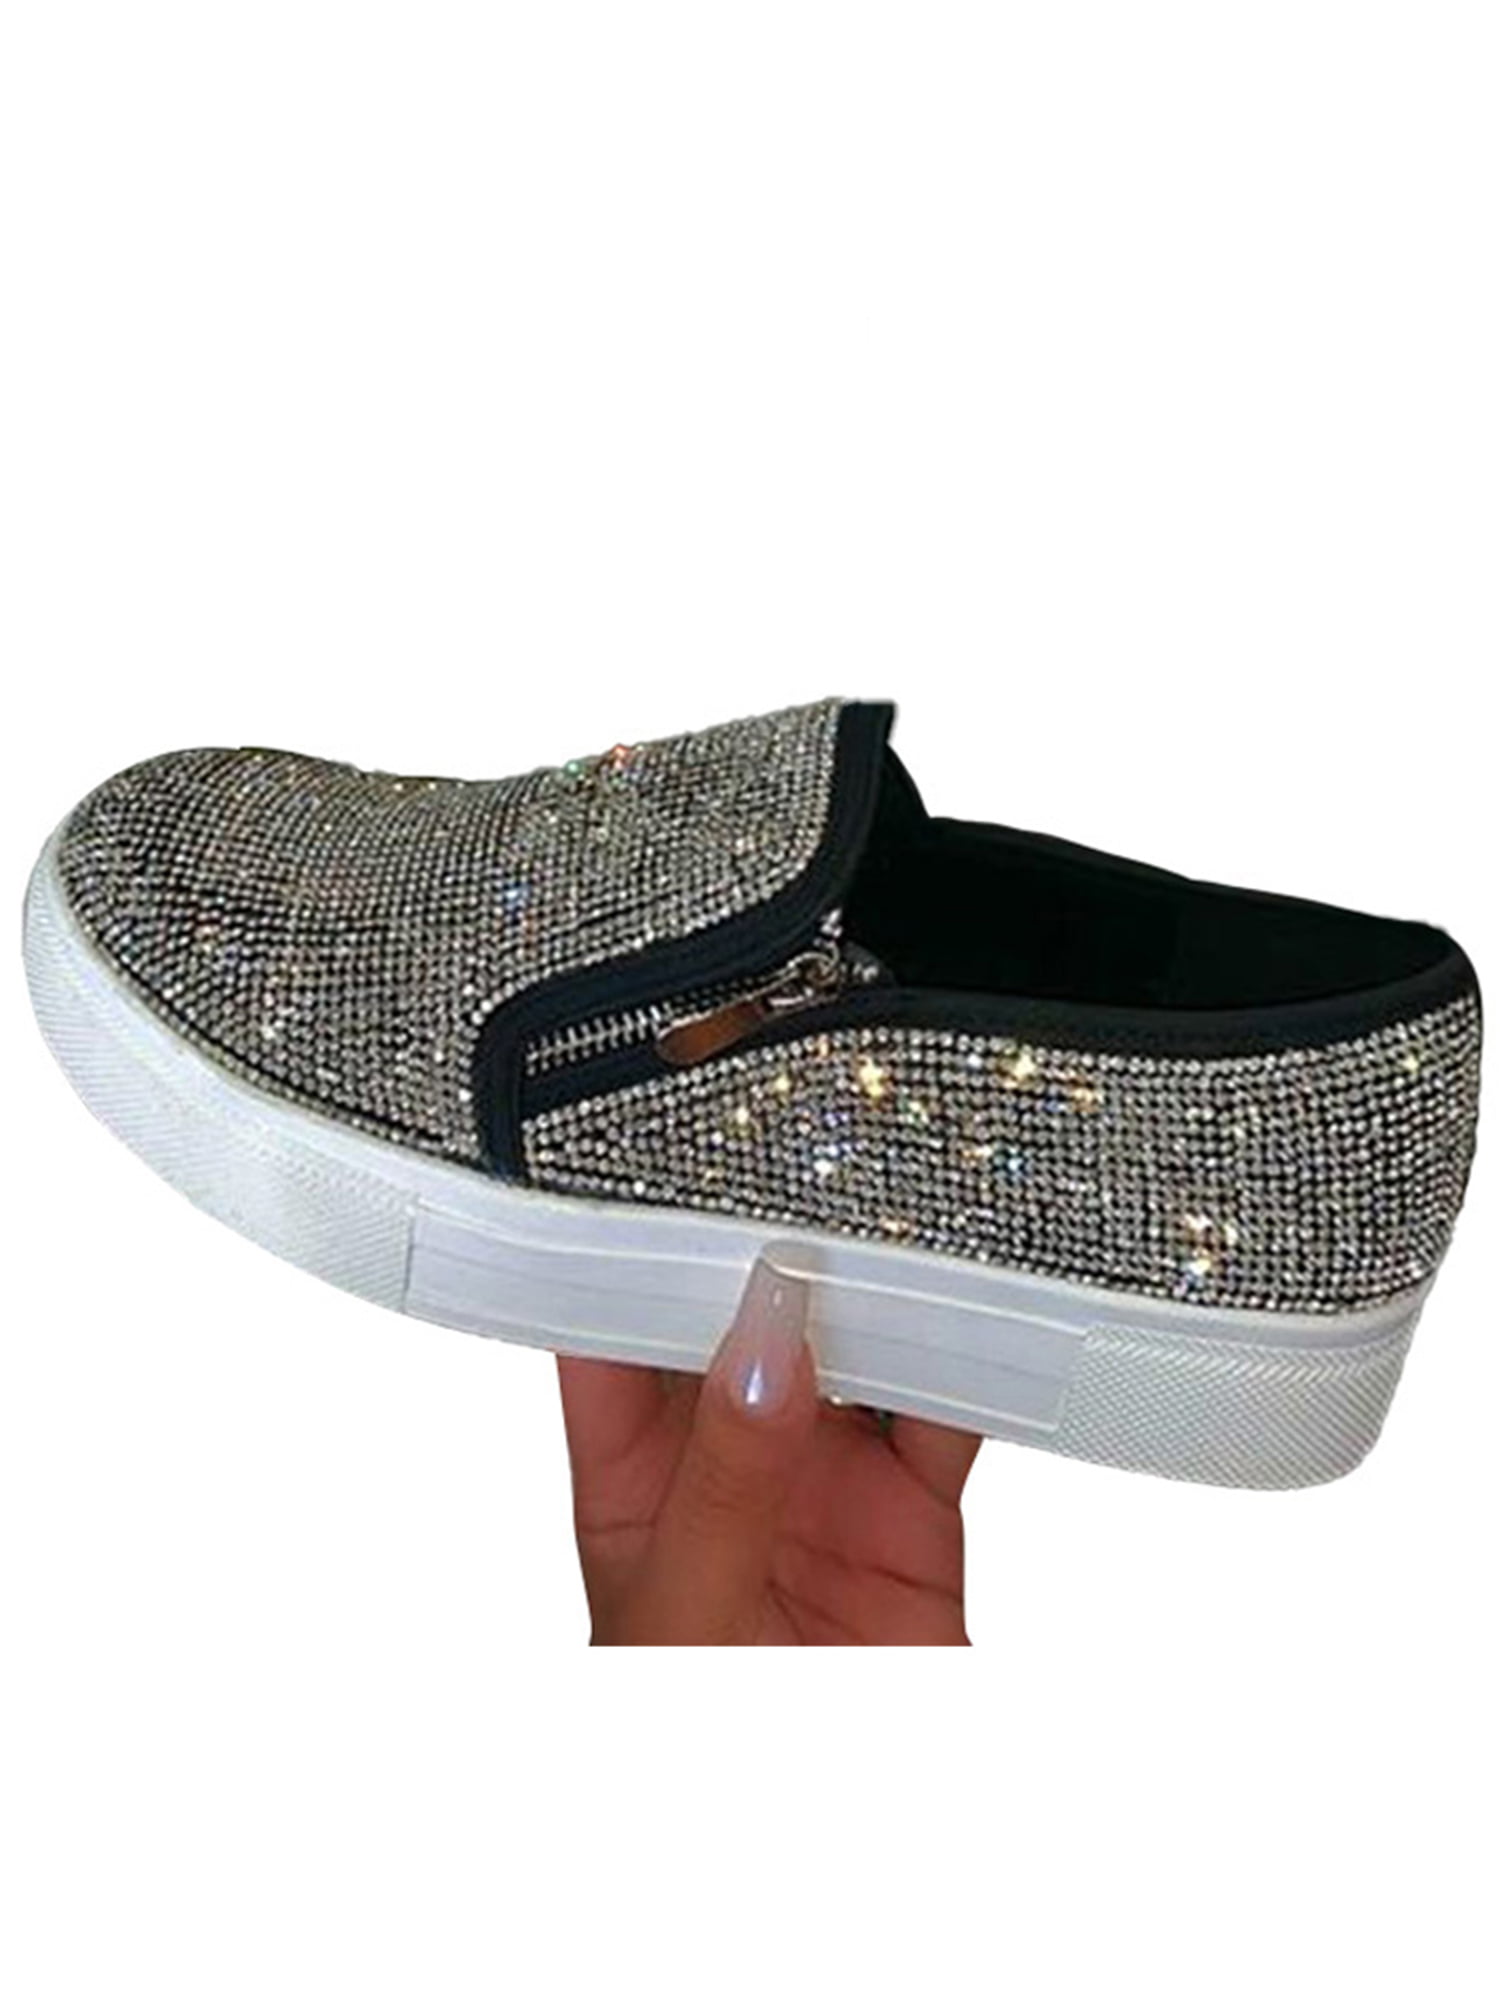 Details about   45 46 47 48 Women's Pointy Toe Sequins Glitter Loafer Block Heel Shoes Outdoor D 